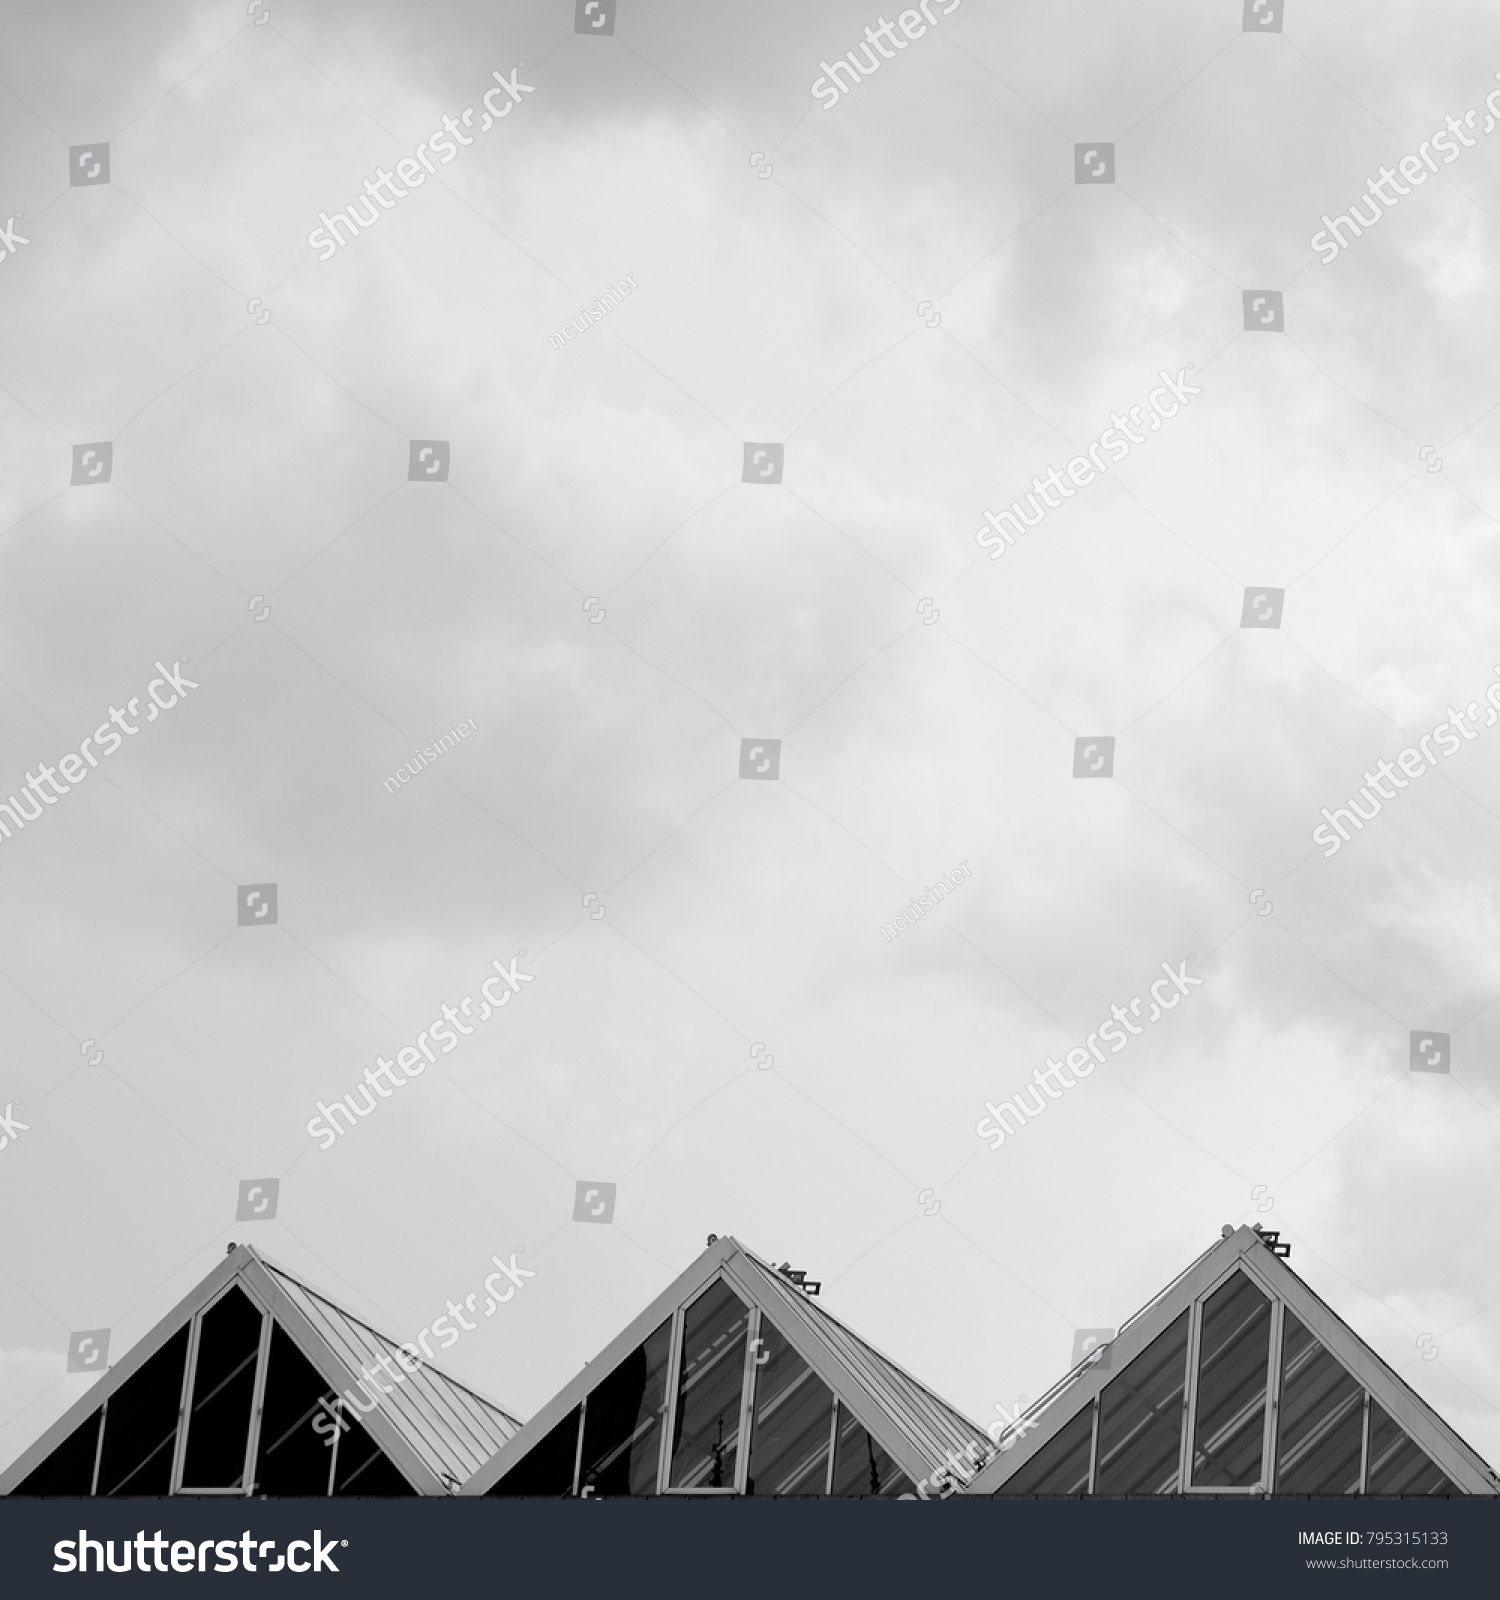 three triangles, cloudy sky in background #795315133